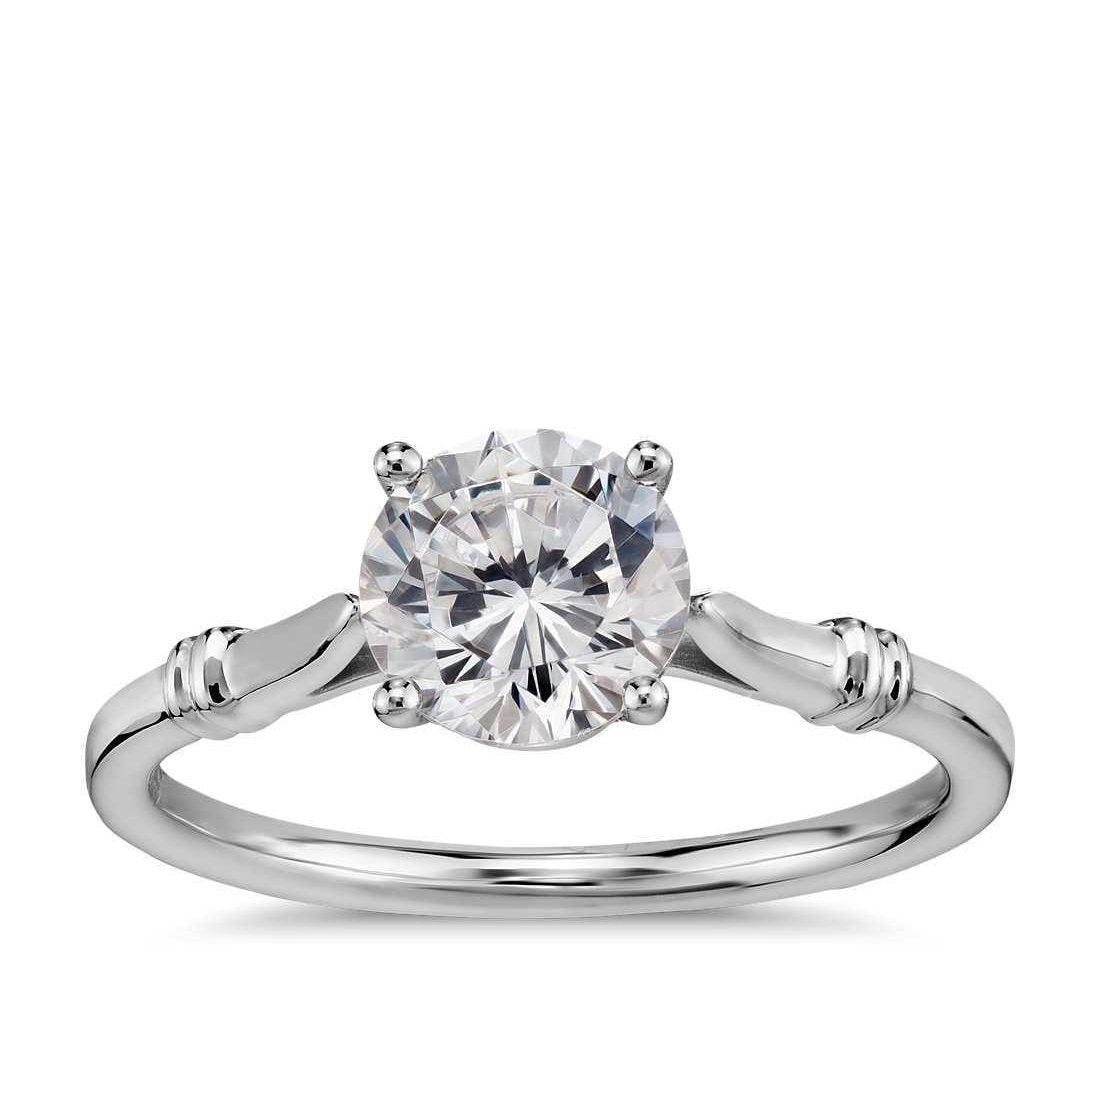 Round Cut Sparkling 3 Ct Genuine Diamond Engagement Solitaire Ring White Gold